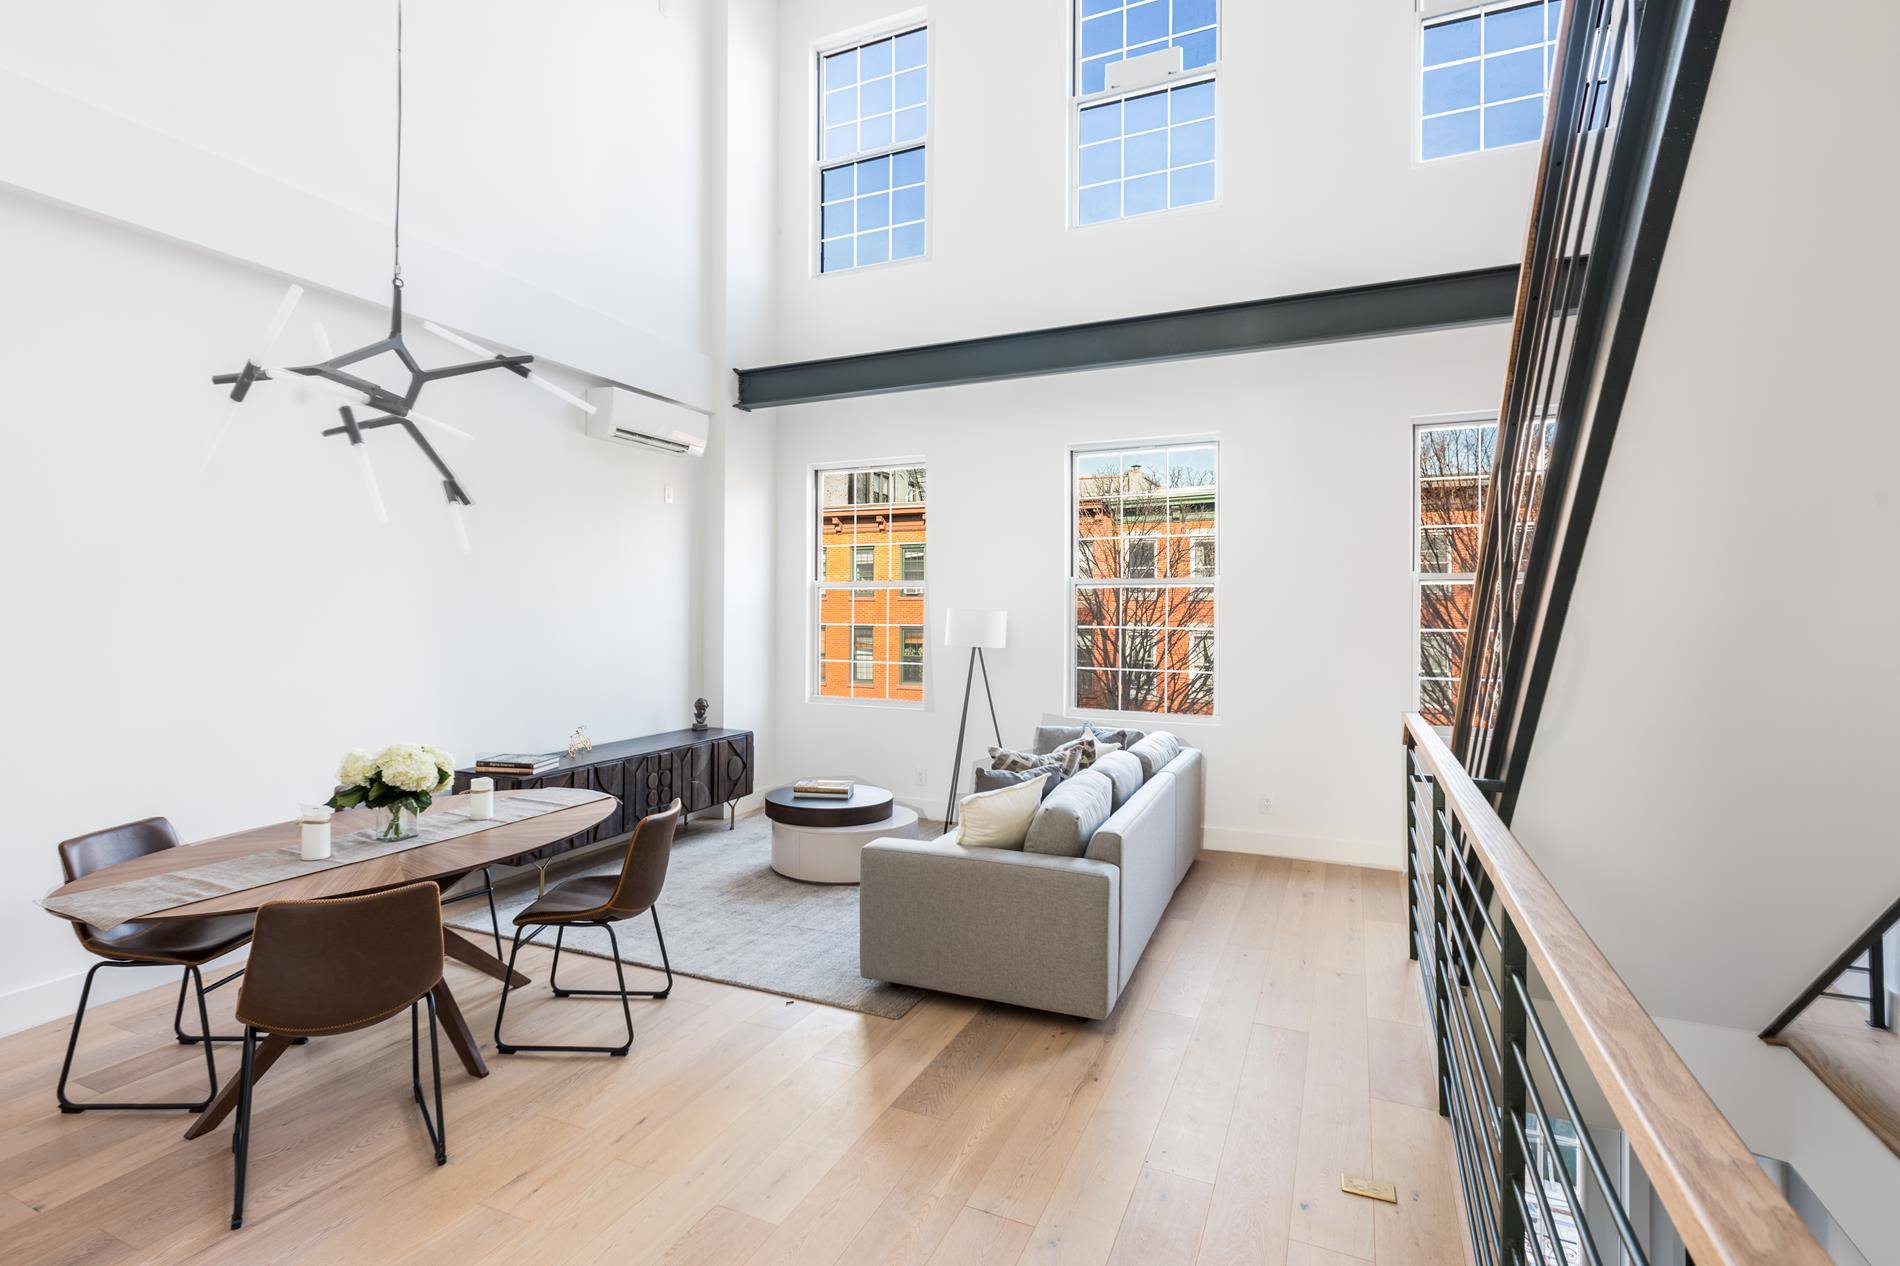 Located on a picturesque tree lined block between Bedford Avenue and Berry Street, 124 South 2nd Street has been completely and tastefully rebuilt to the highest standards.